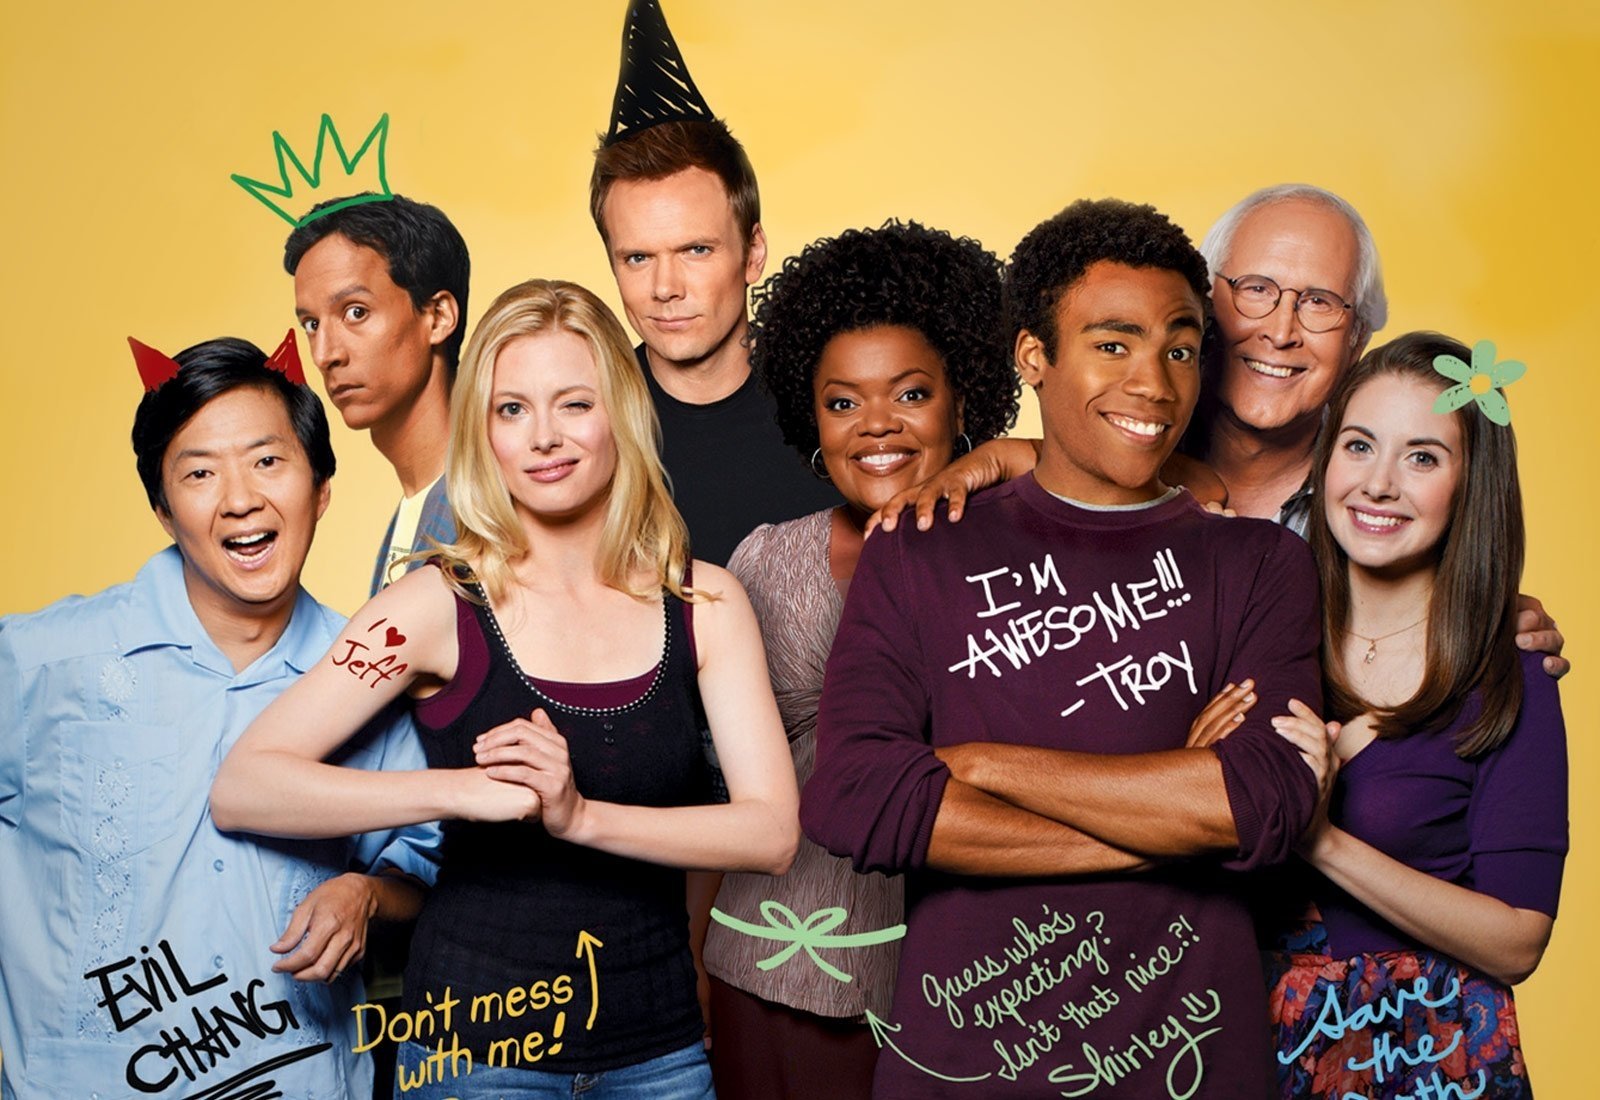 These hilarious 5 Netflix series are very similar to Community